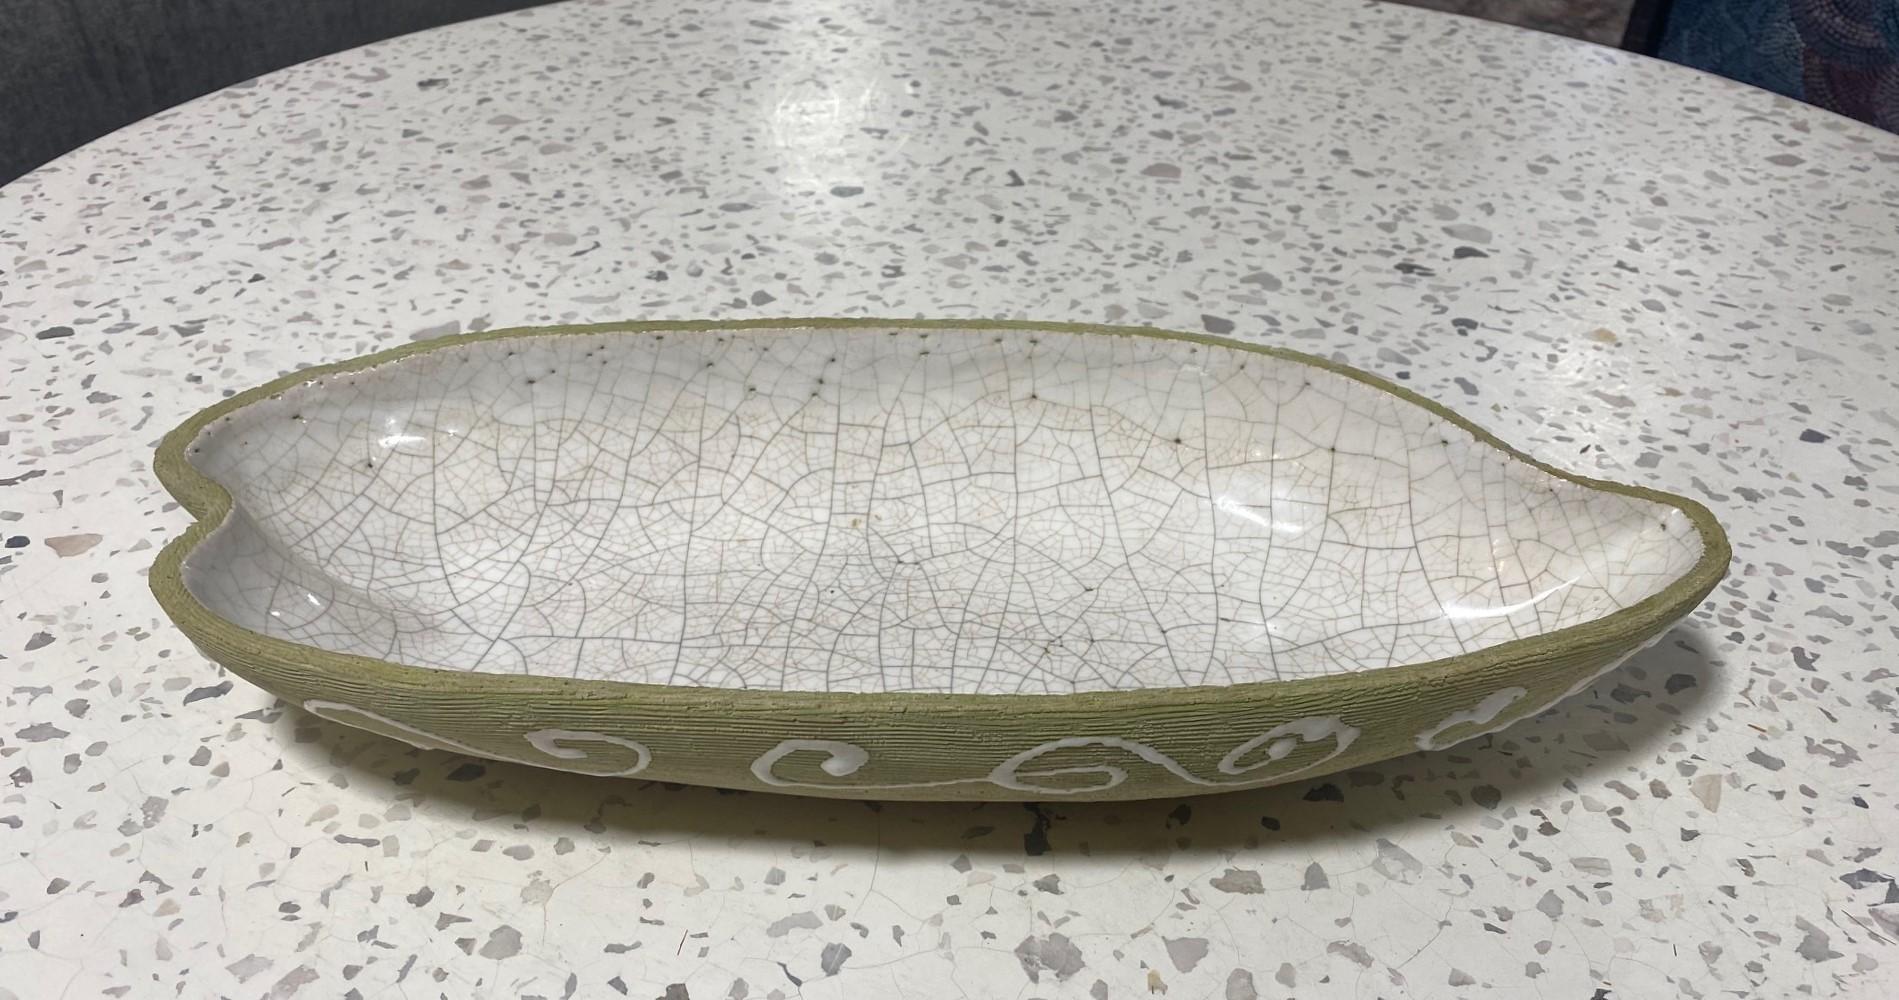 A beautifully designed and gorgeously glazed large stoneware Mid-century Modern low bowl by California studio pottery artist Barbara Willis (1917-2011).  The elongated curved contours and stunning white crackle glaze of this work are really quite